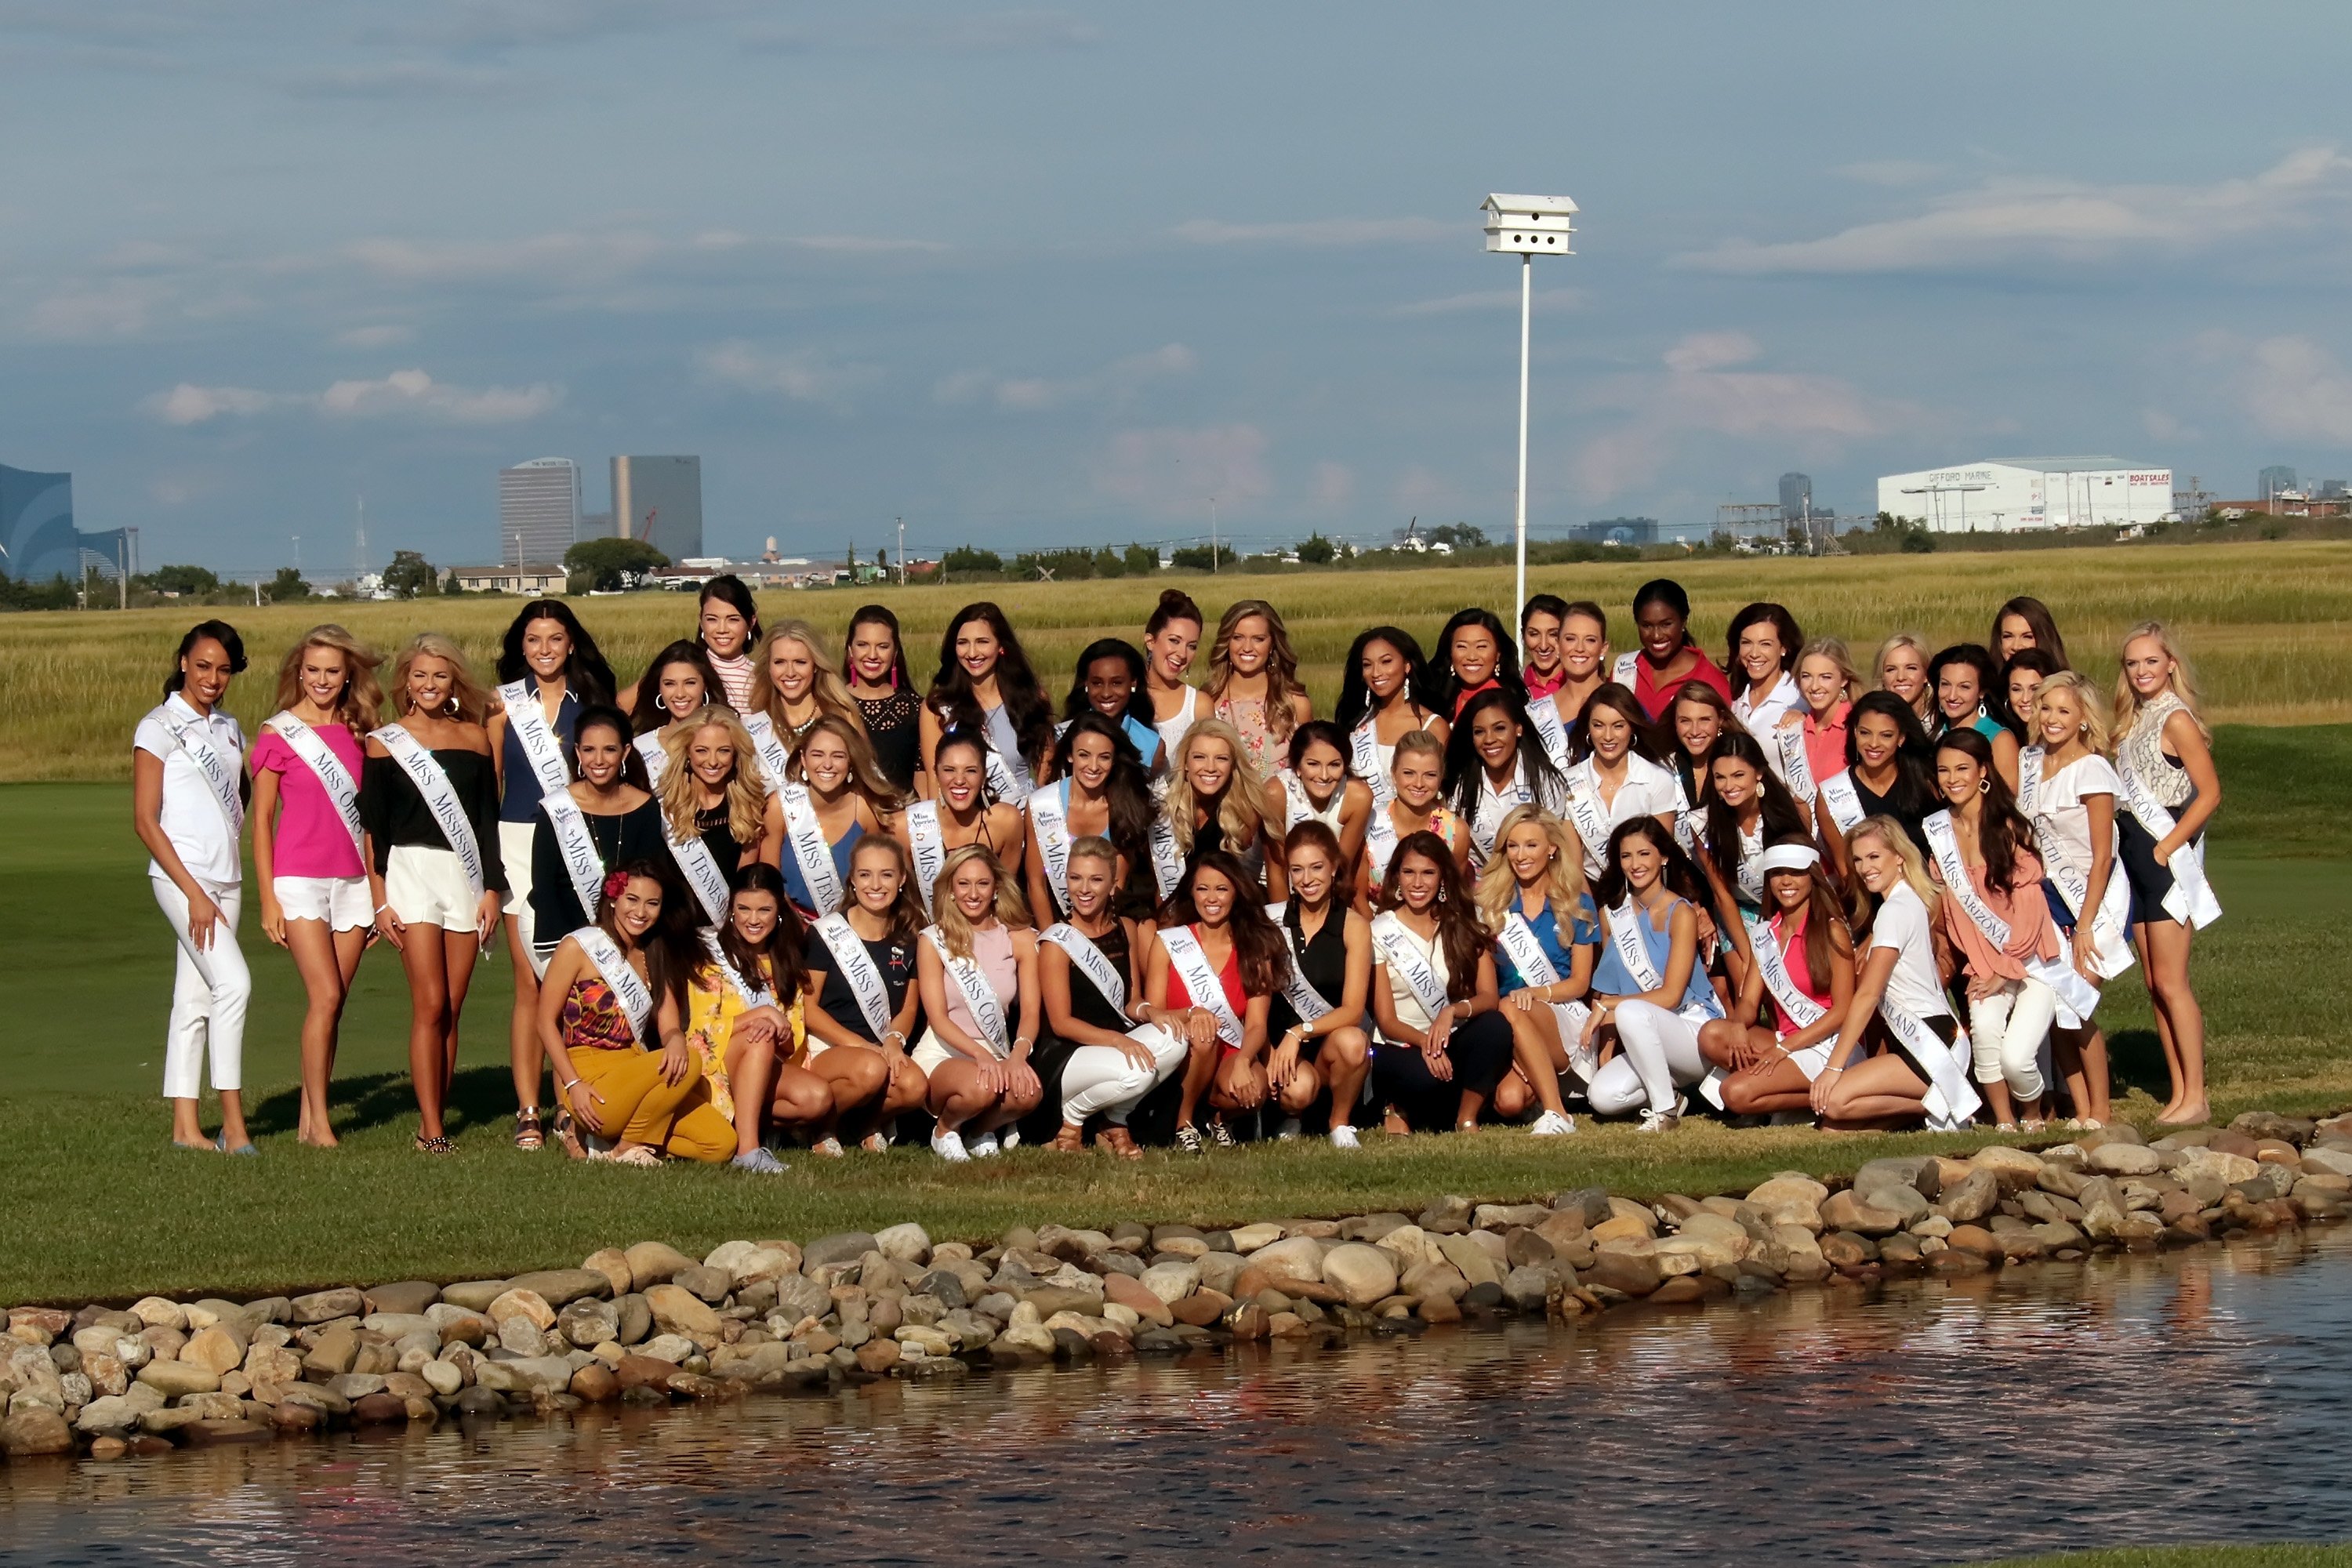 The fifty-one Miss America contestants pose on the fairway for a group photograph prior to taking golf lessons at Linwood Country Club on September 3, 2017 in Linwood, New Jersey